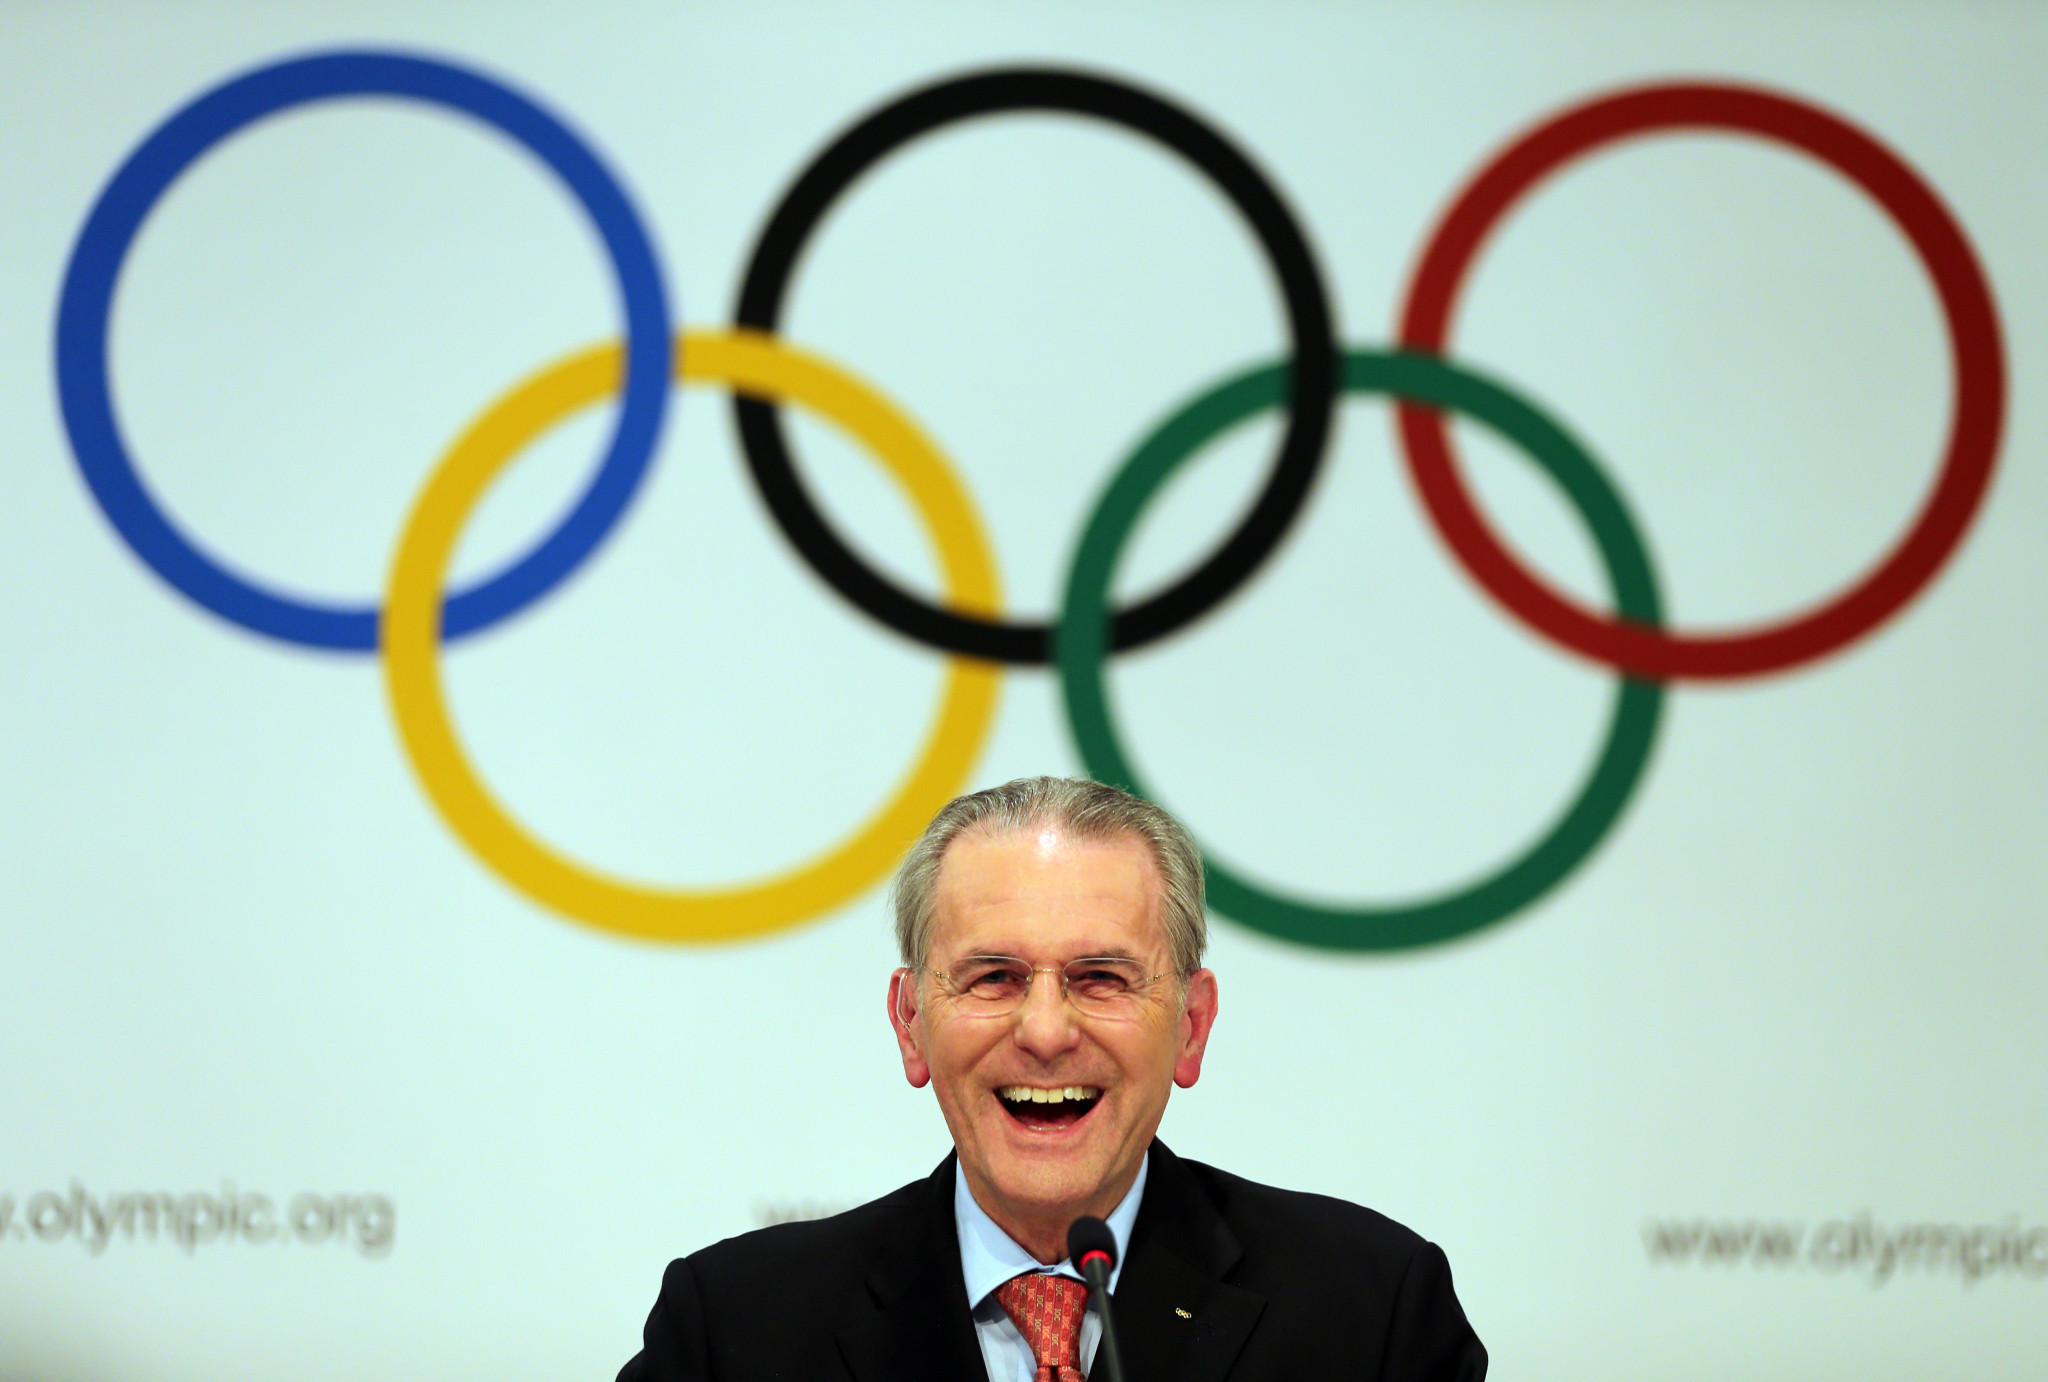 The FITEQ said former IOC President Jacques Rogge "inspired us as sports leaders" ©Getty Images